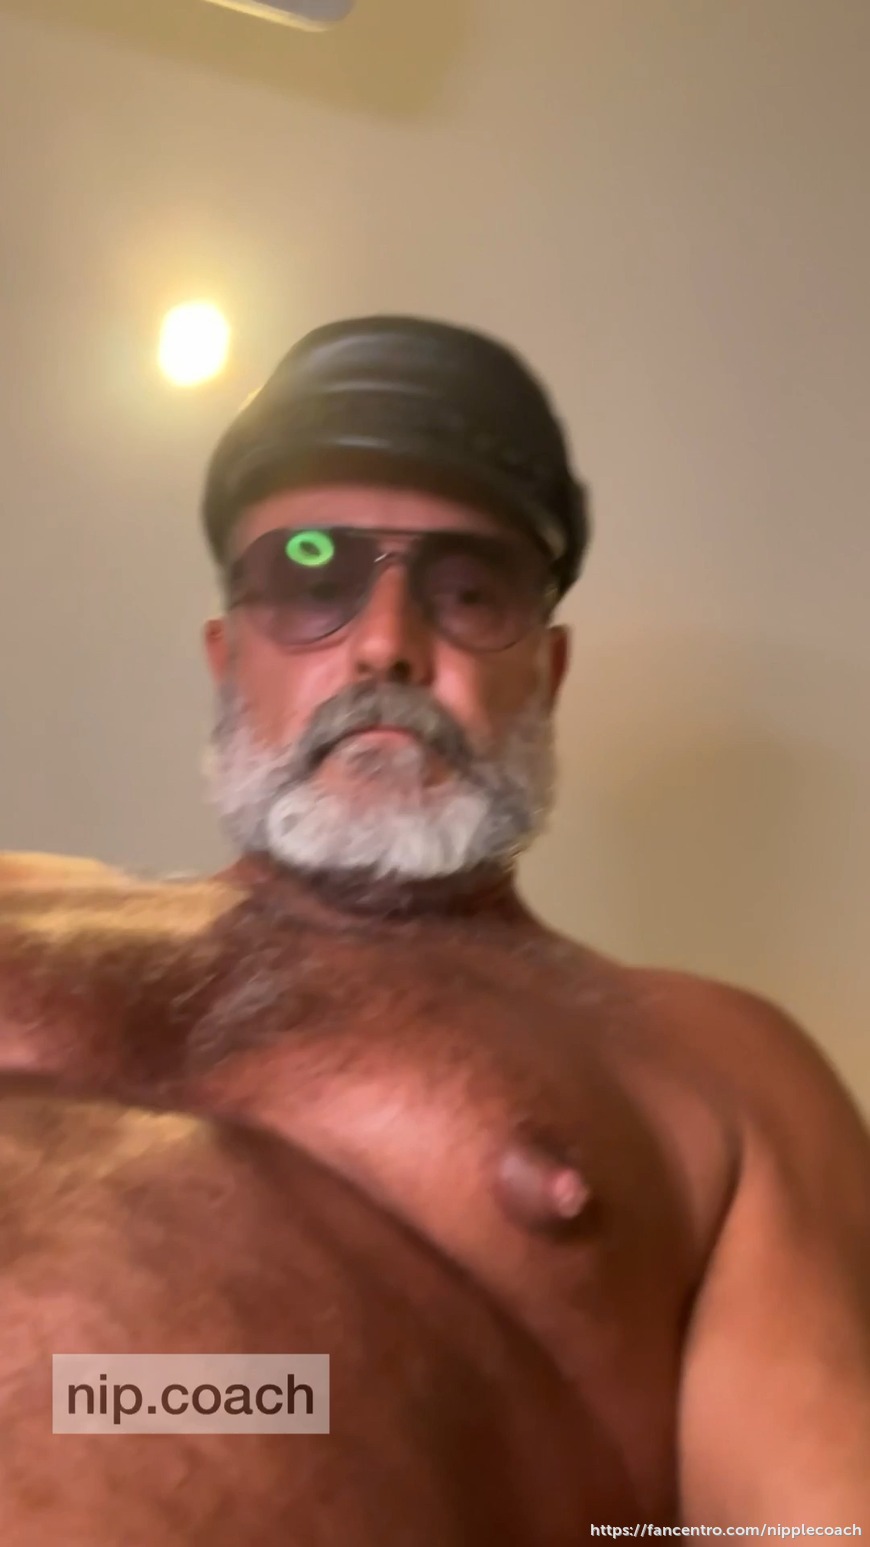 Wanna lick mature belly and big nipple daddy’s hole and bull balls?